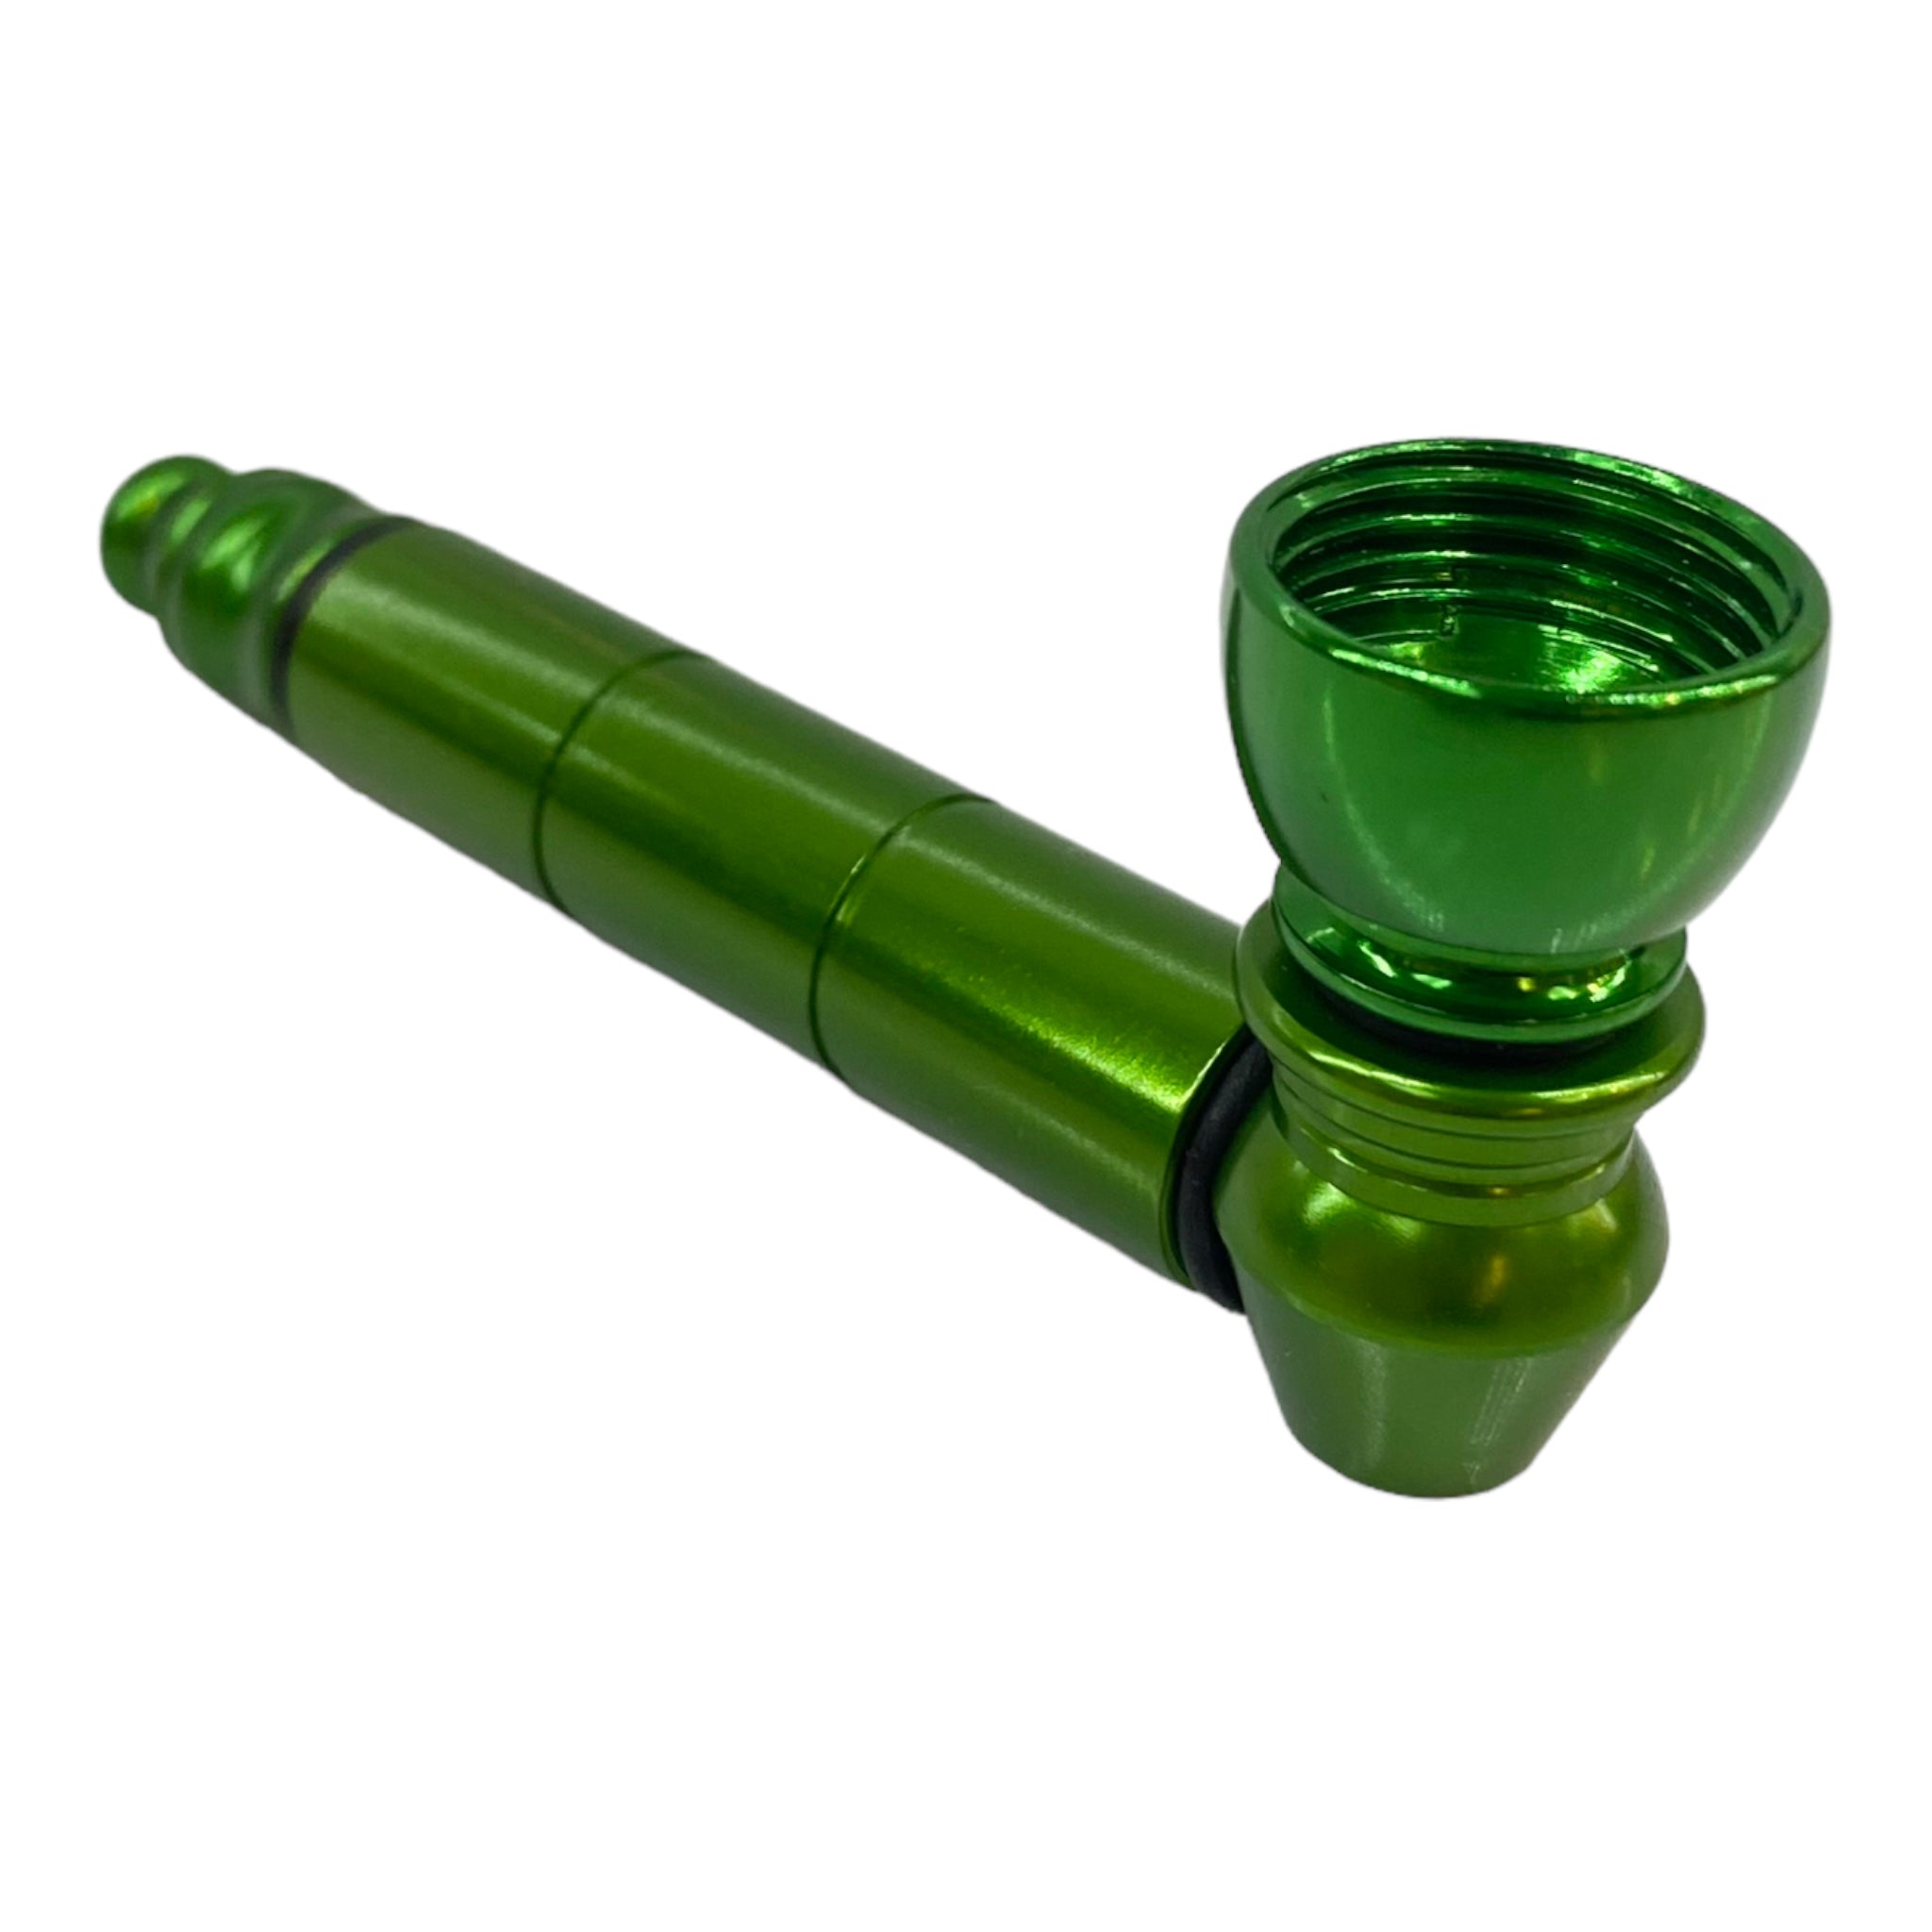 Metal weed and tobbaco pipe green basic metal pipe with small chamber for sale free shipping